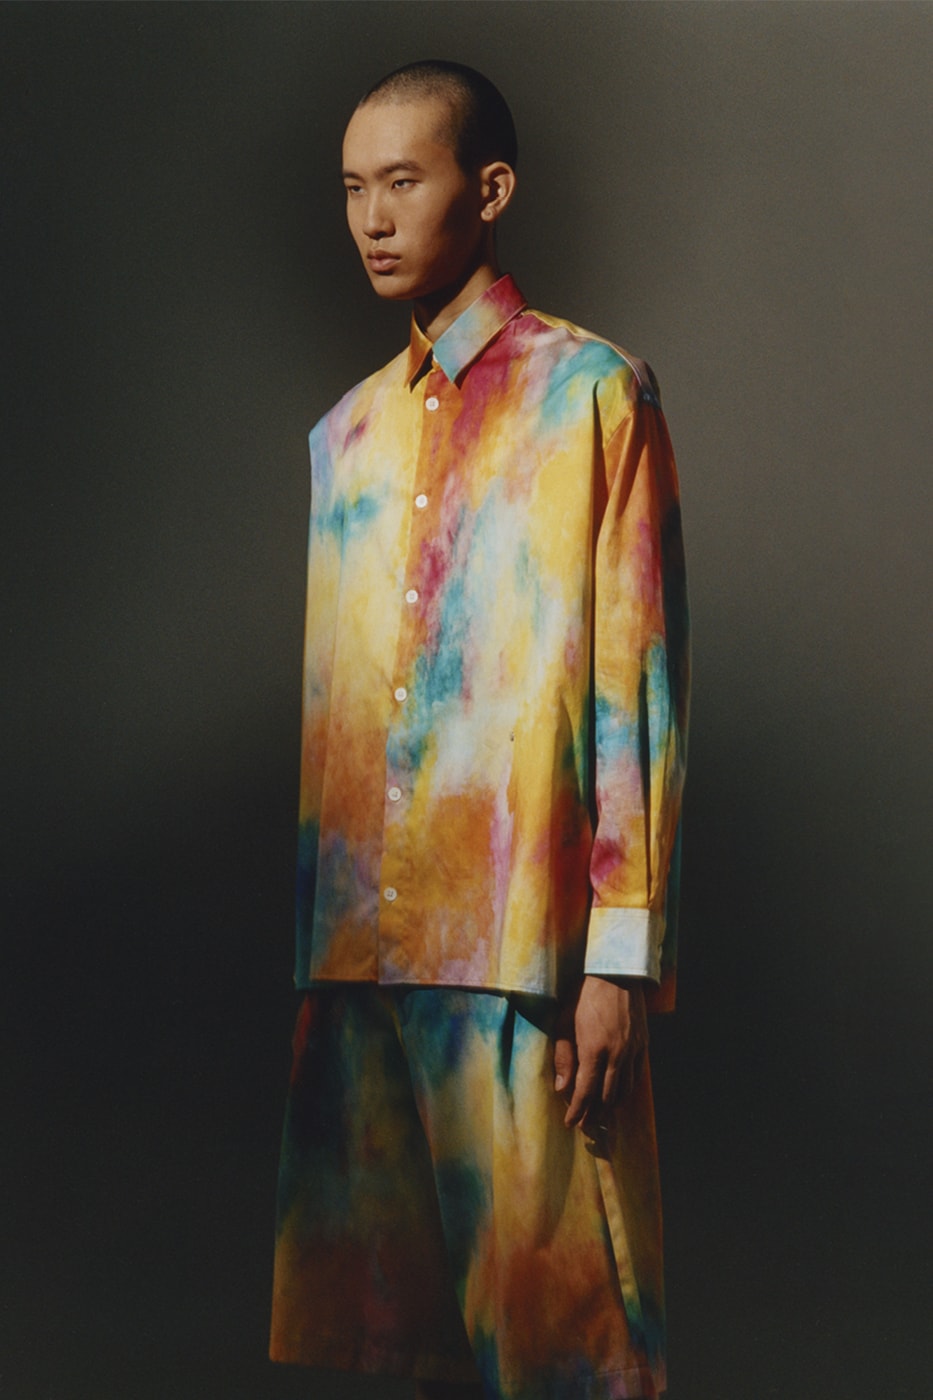 Études and Jean-Baptiste Bernade SS23 Collaboration Weaves Together Textile and Tie Dye paris fashion week colors vibrant hues colorful luminous rainbow shades